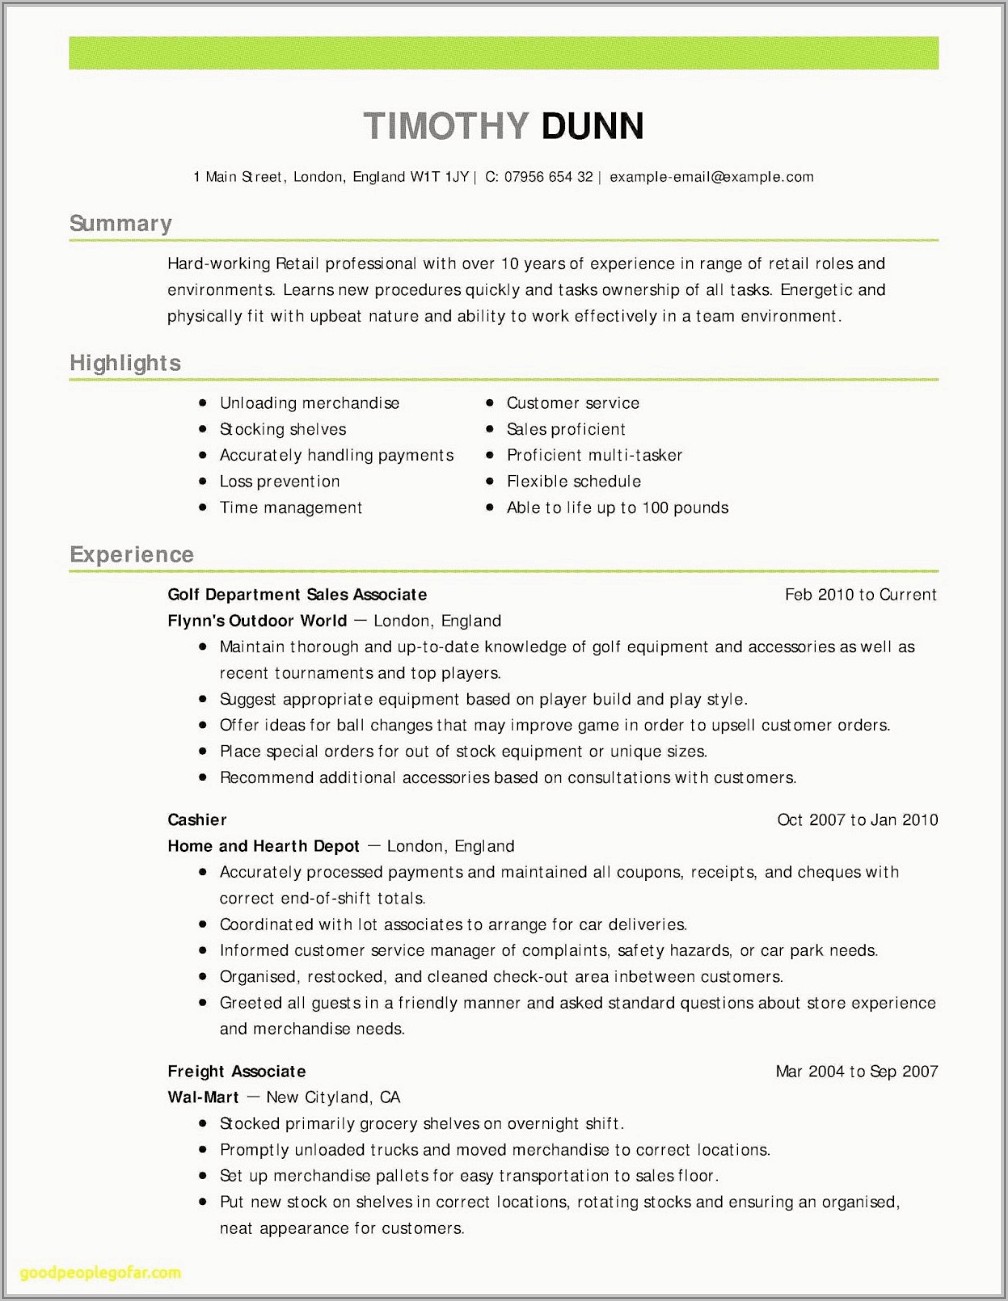 Examples Of Professional Summaries For Resumes